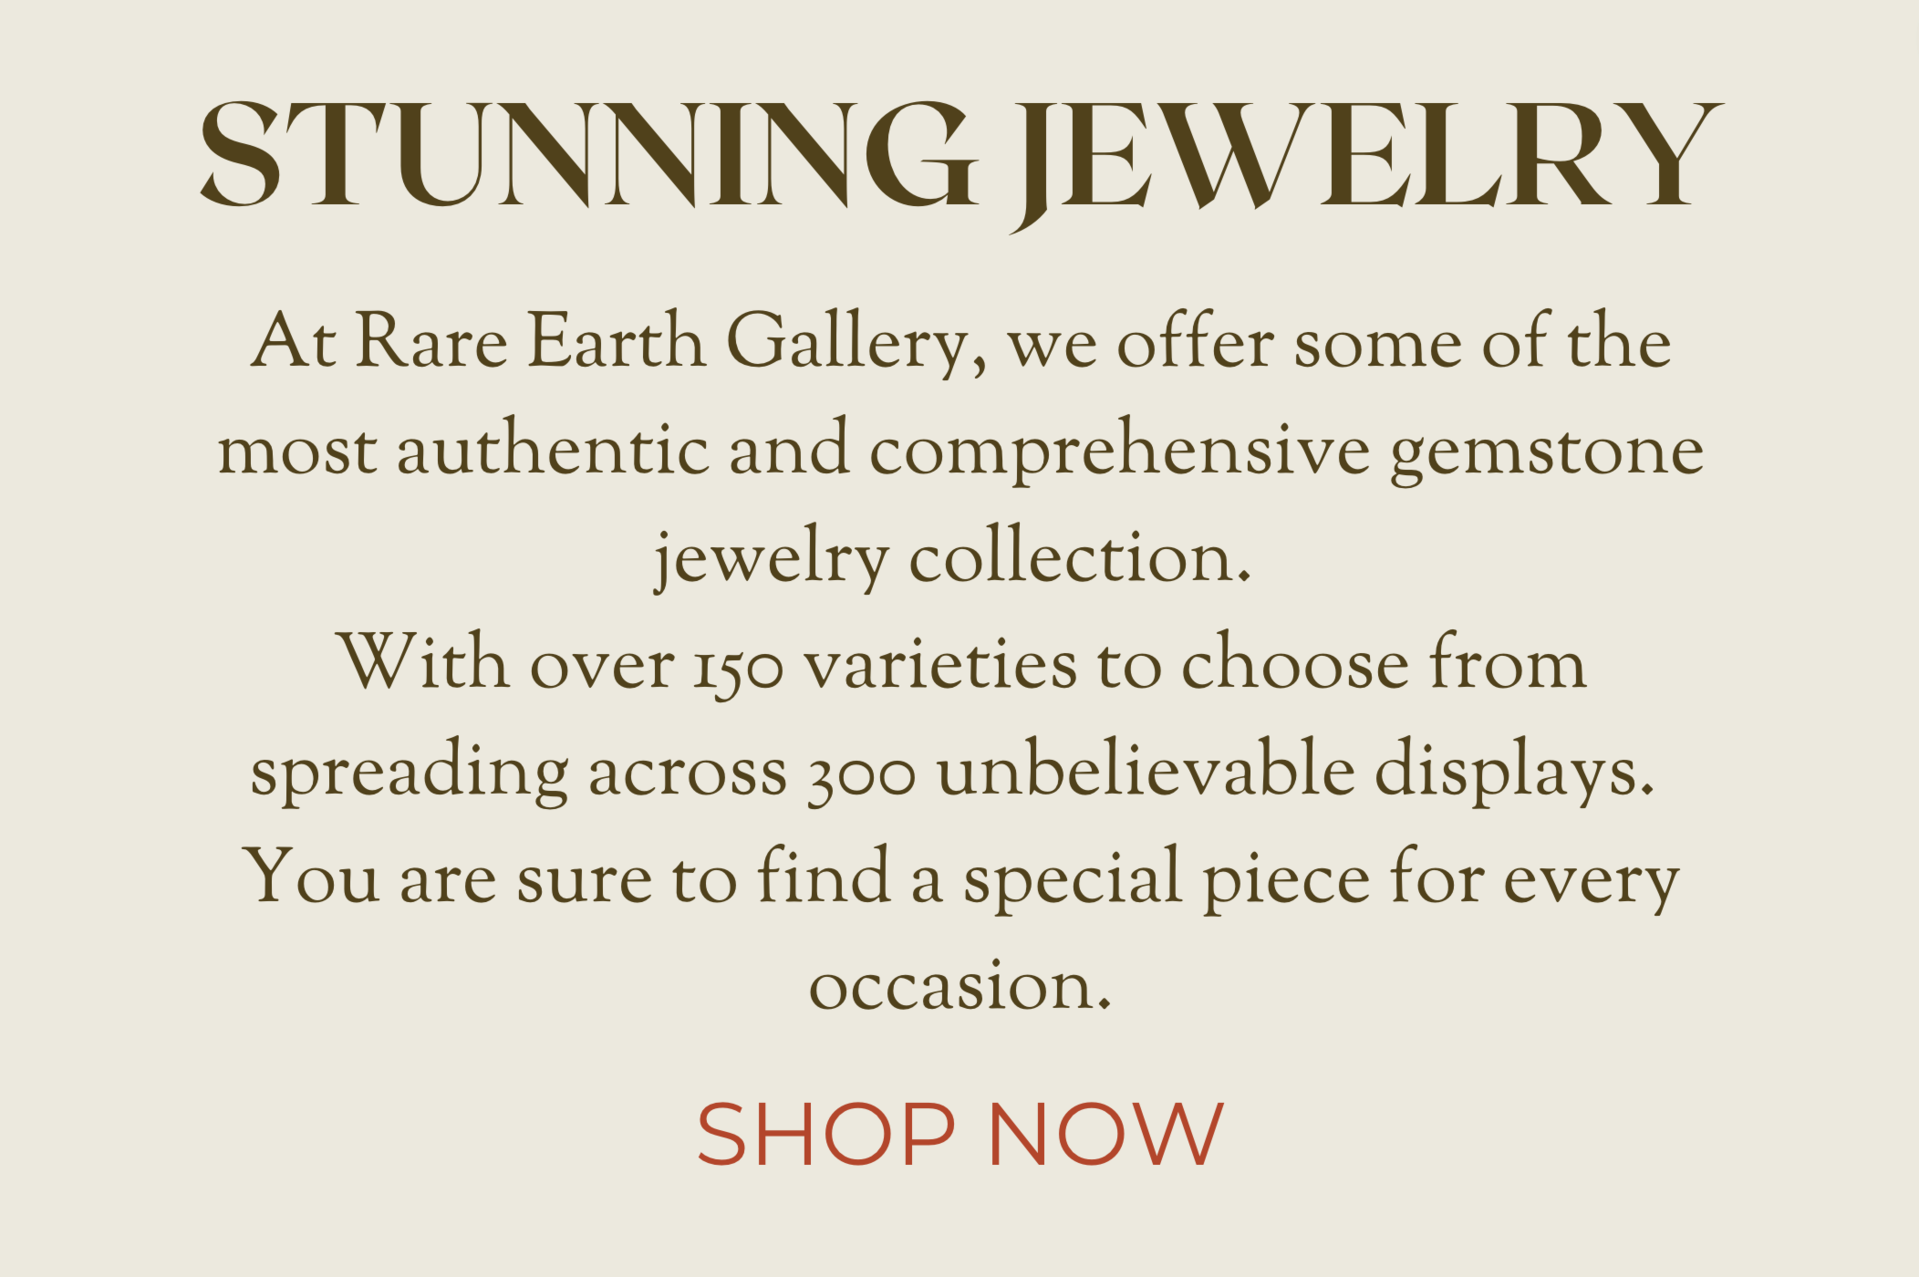 Rare Earth Gallery - Website Home Page